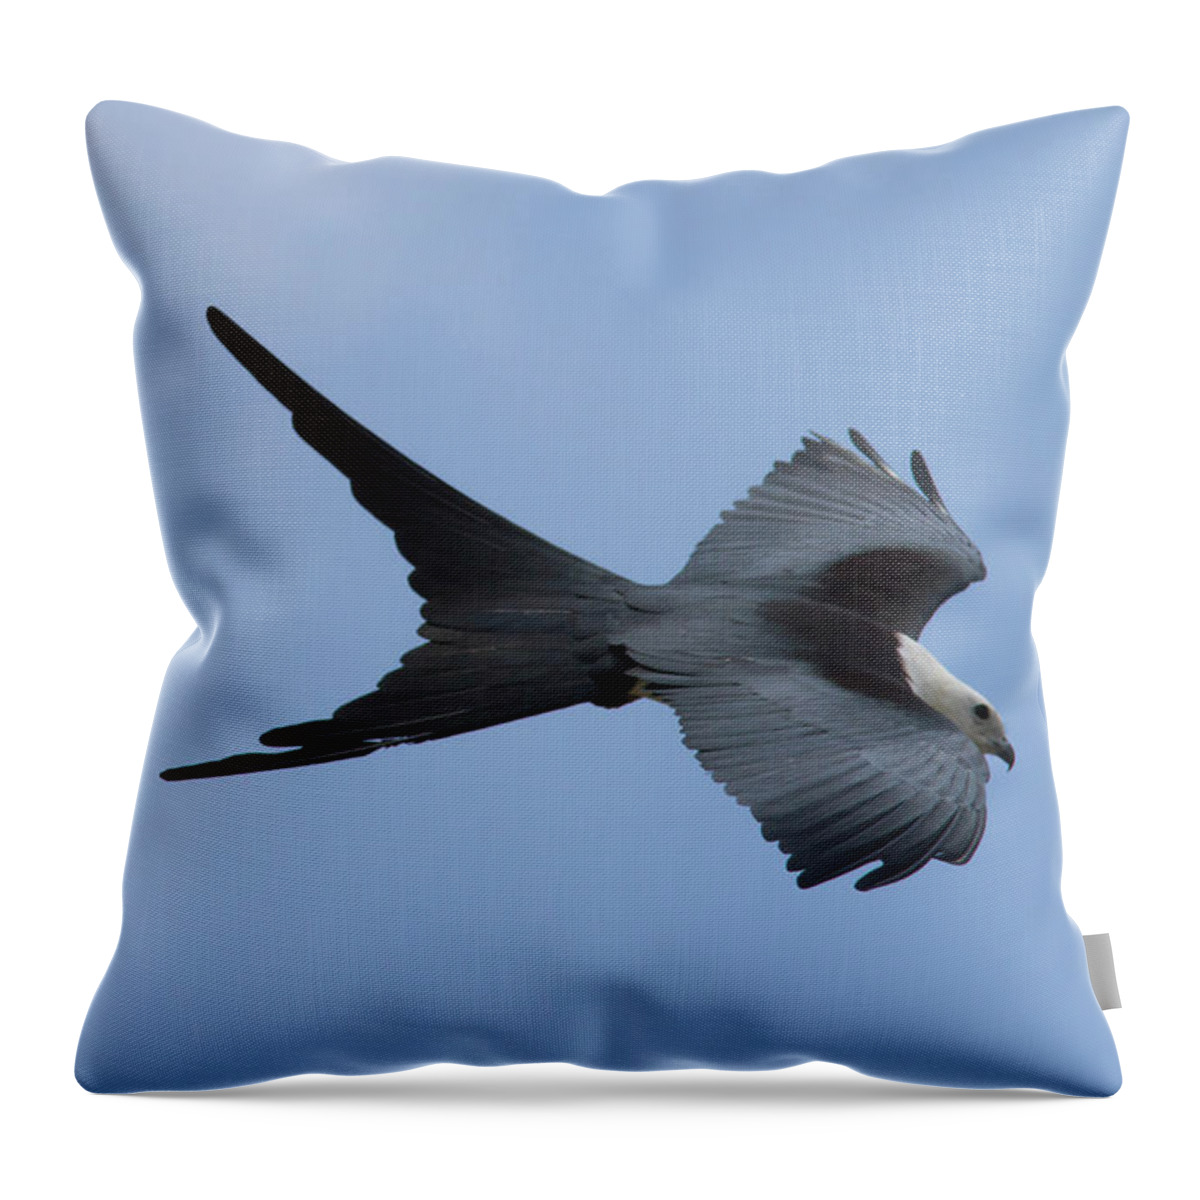 Swallow-tailed Kite Throw Pillow featuring the photograph Swallow-tailed Kite #1 by Paul Rebmann